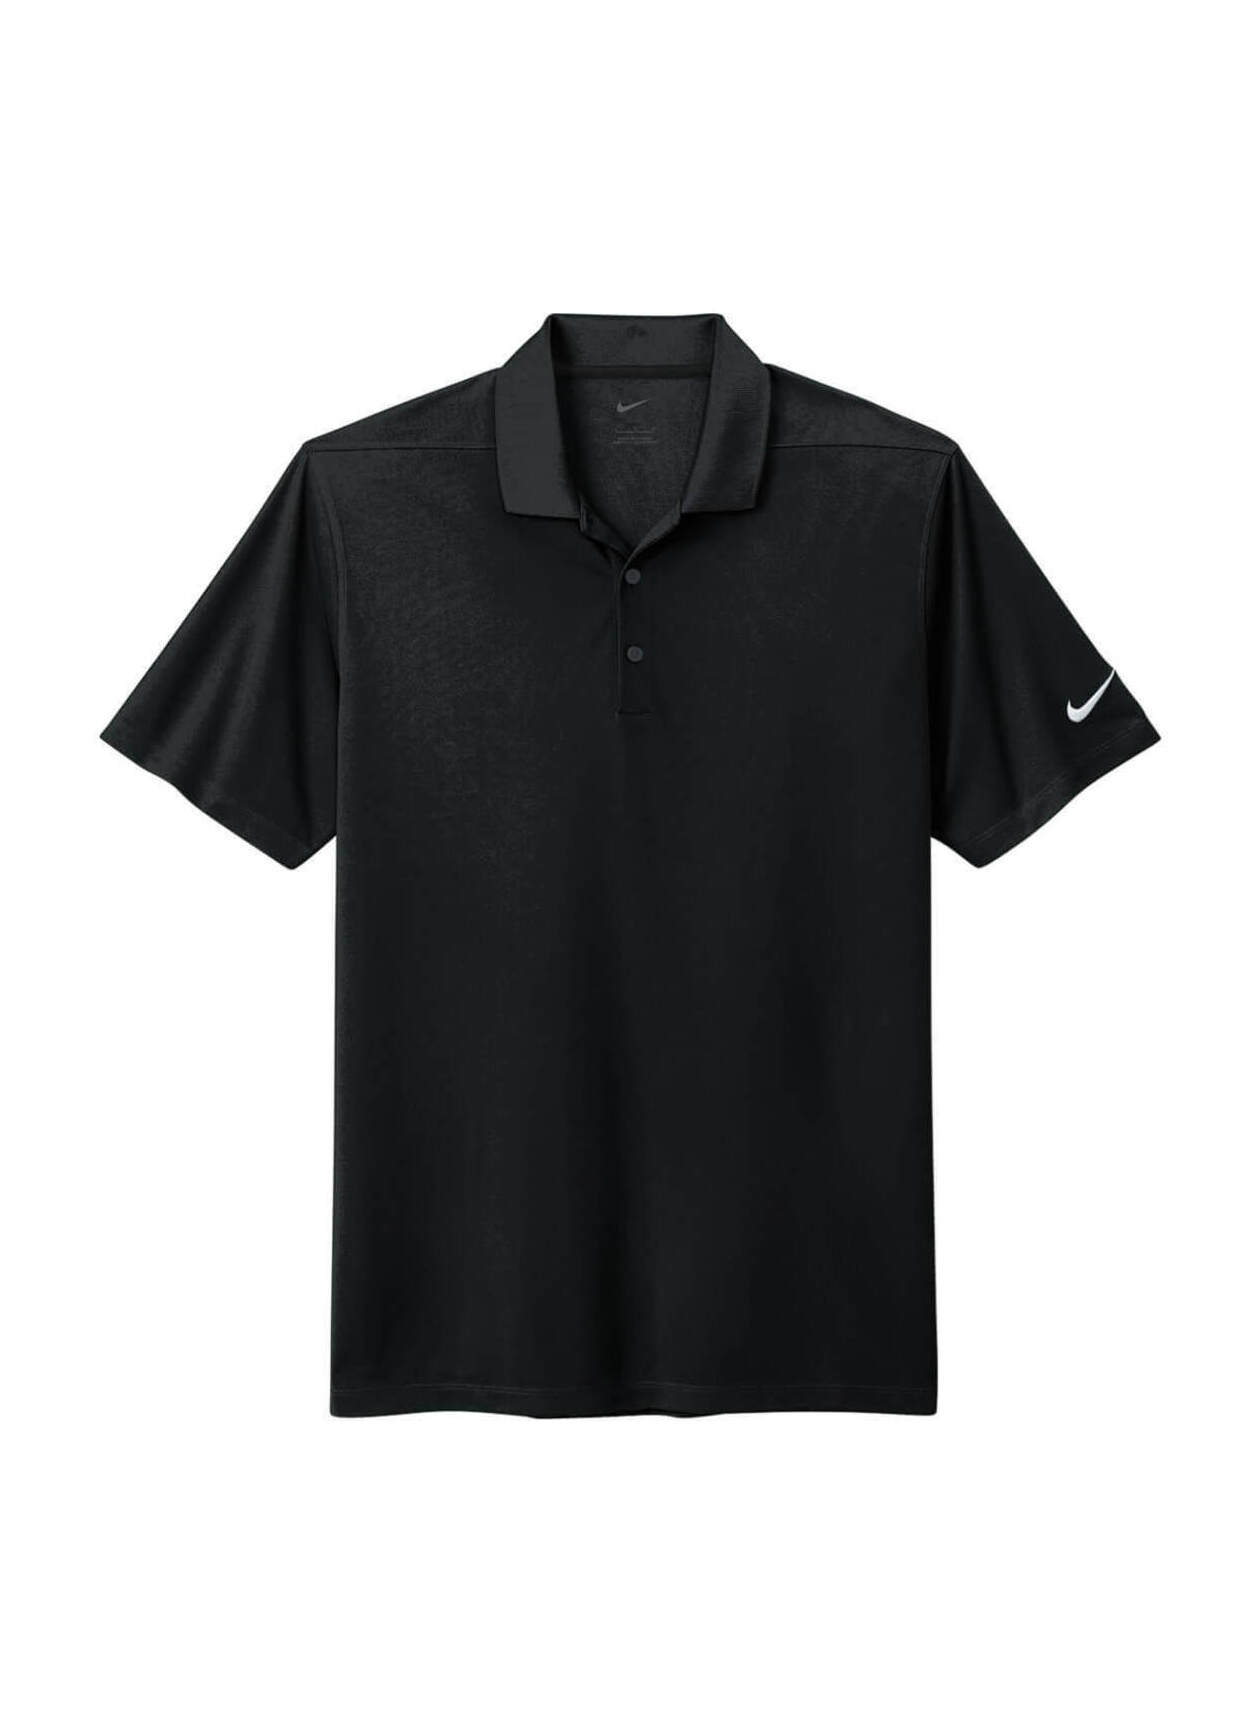  Nike Team Mens Short Sleeve Dri-Fit Polo, Anthracite